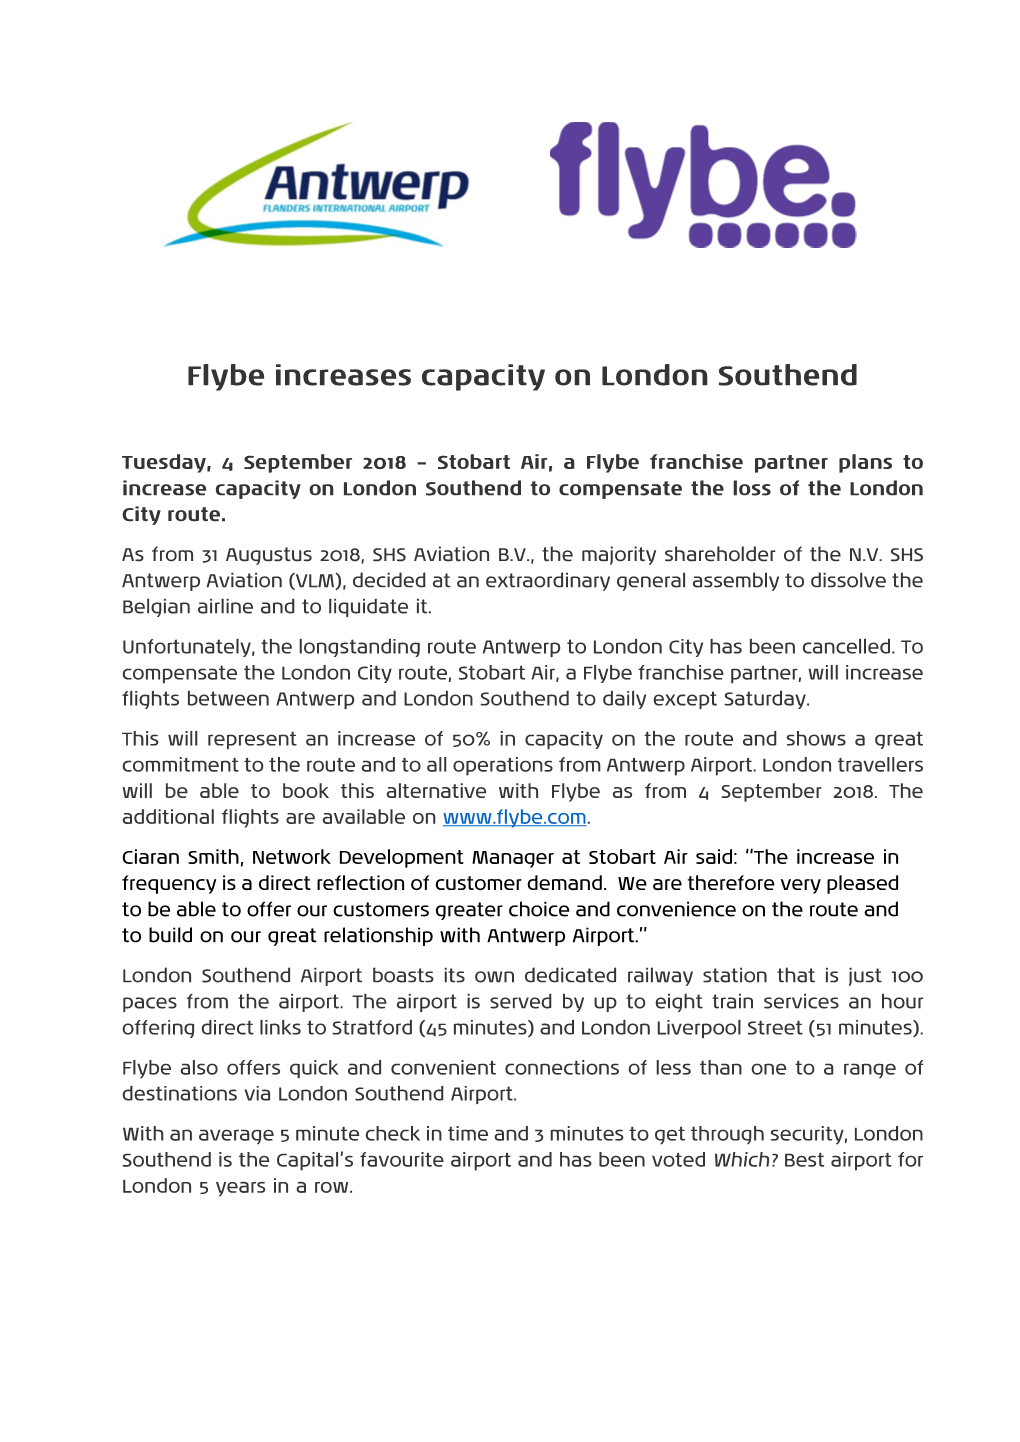 Flybe Increases Capacity on London Southend